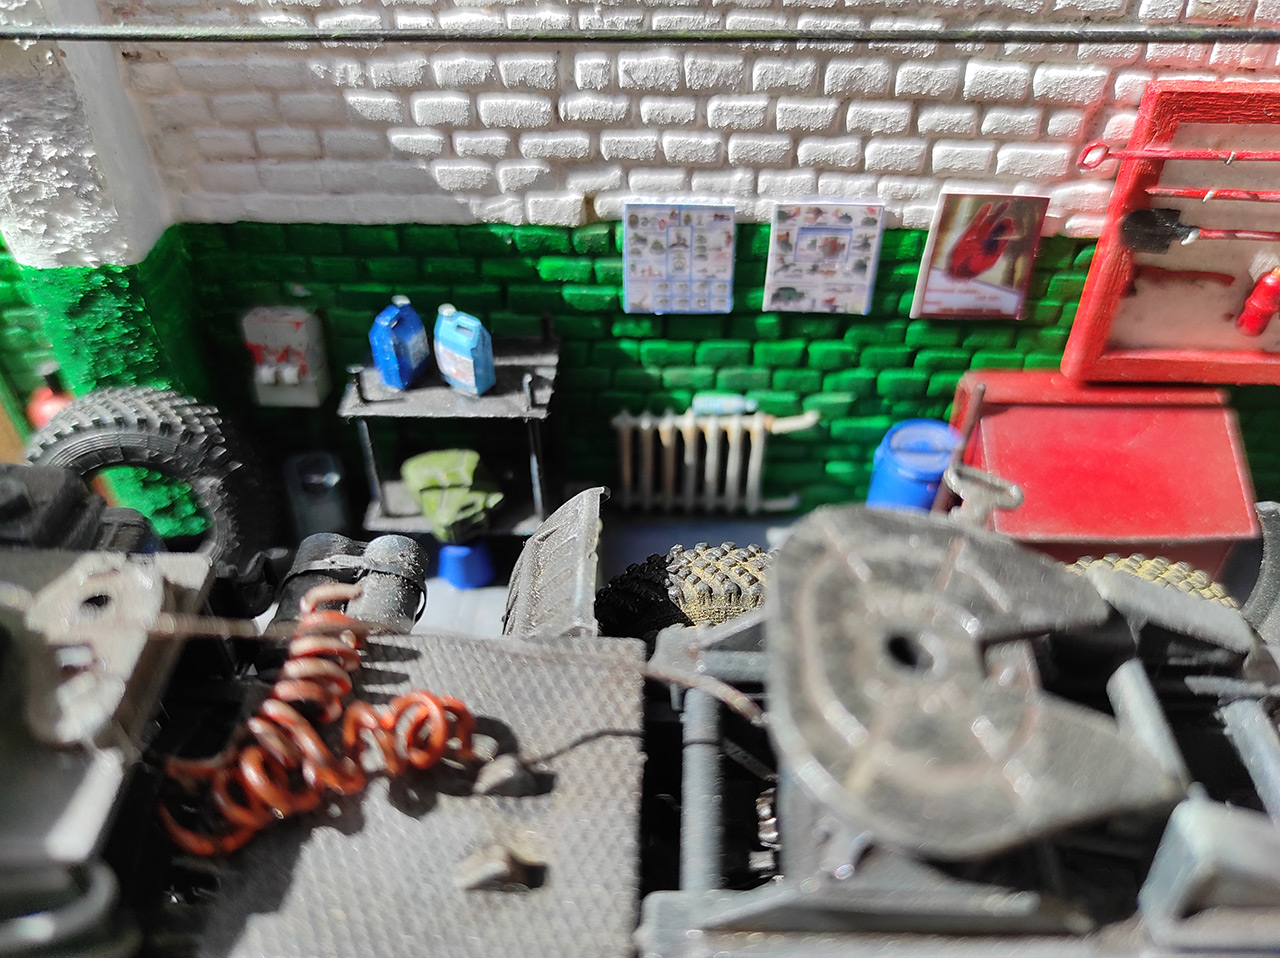 Dioramas and Vignettes: In the garage, photo #14